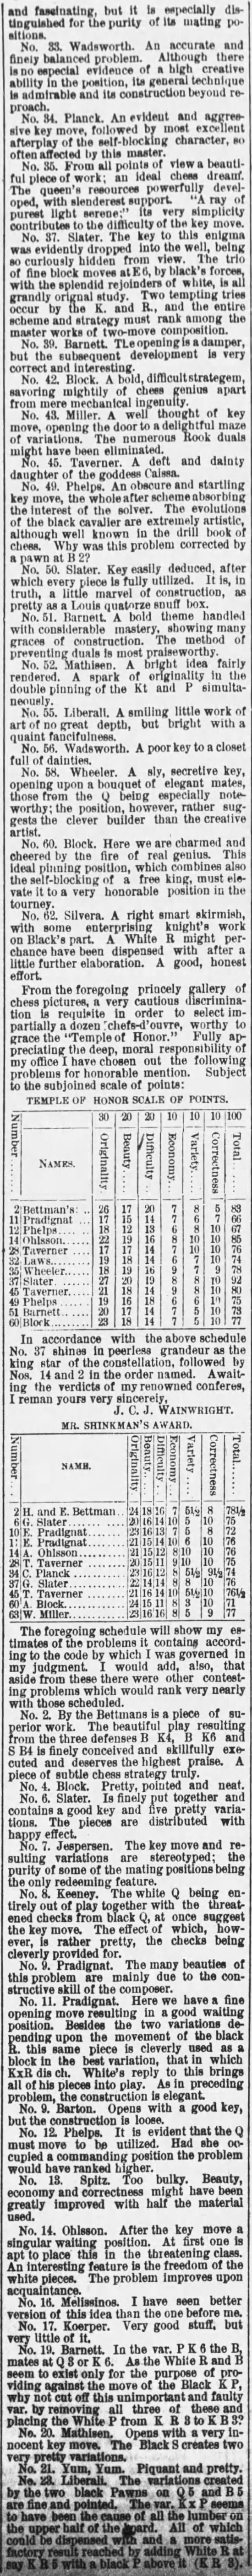 1887.03.13-02 Nashville Daily American.png